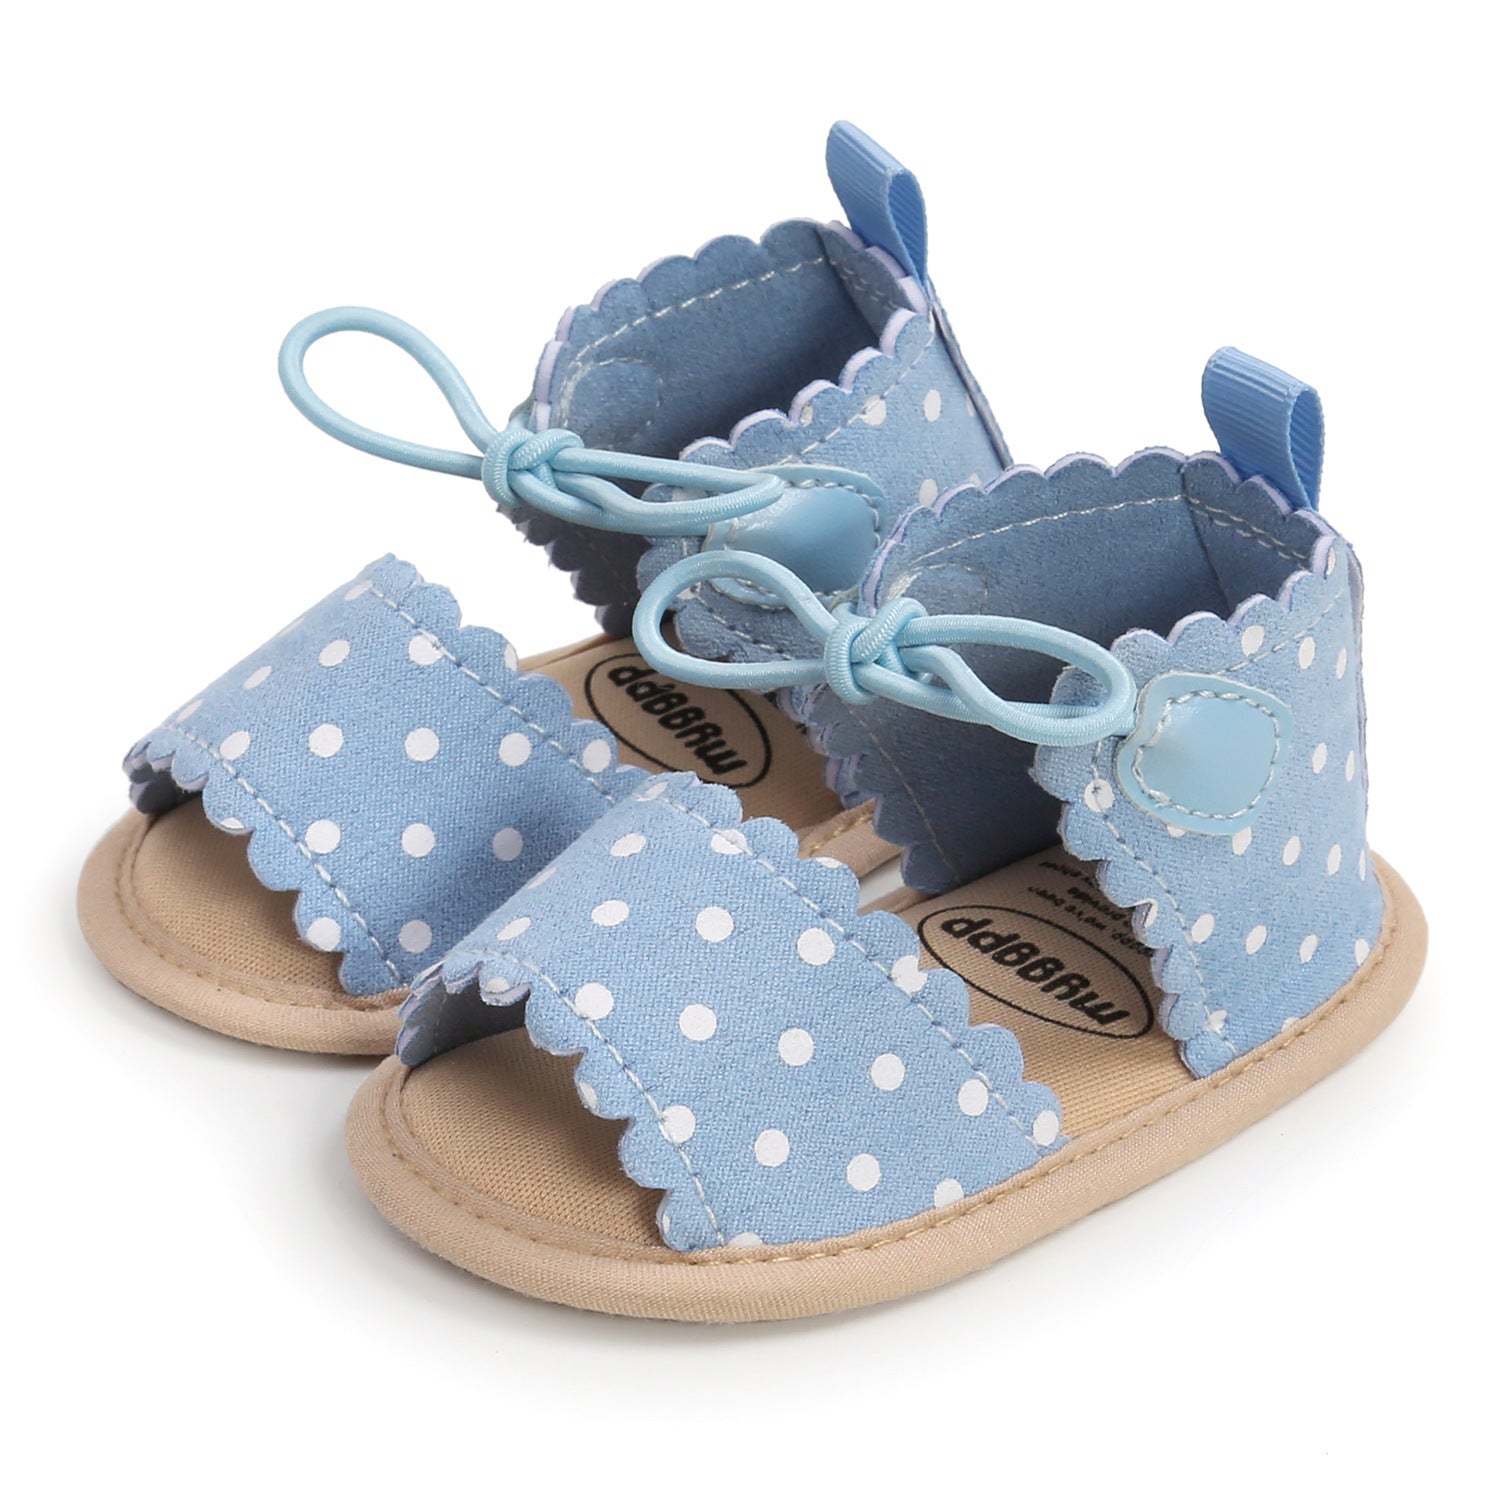 Dot Baby Sandals, Baby Shoes, Toddler Shoes, Women's Bowknot M2009